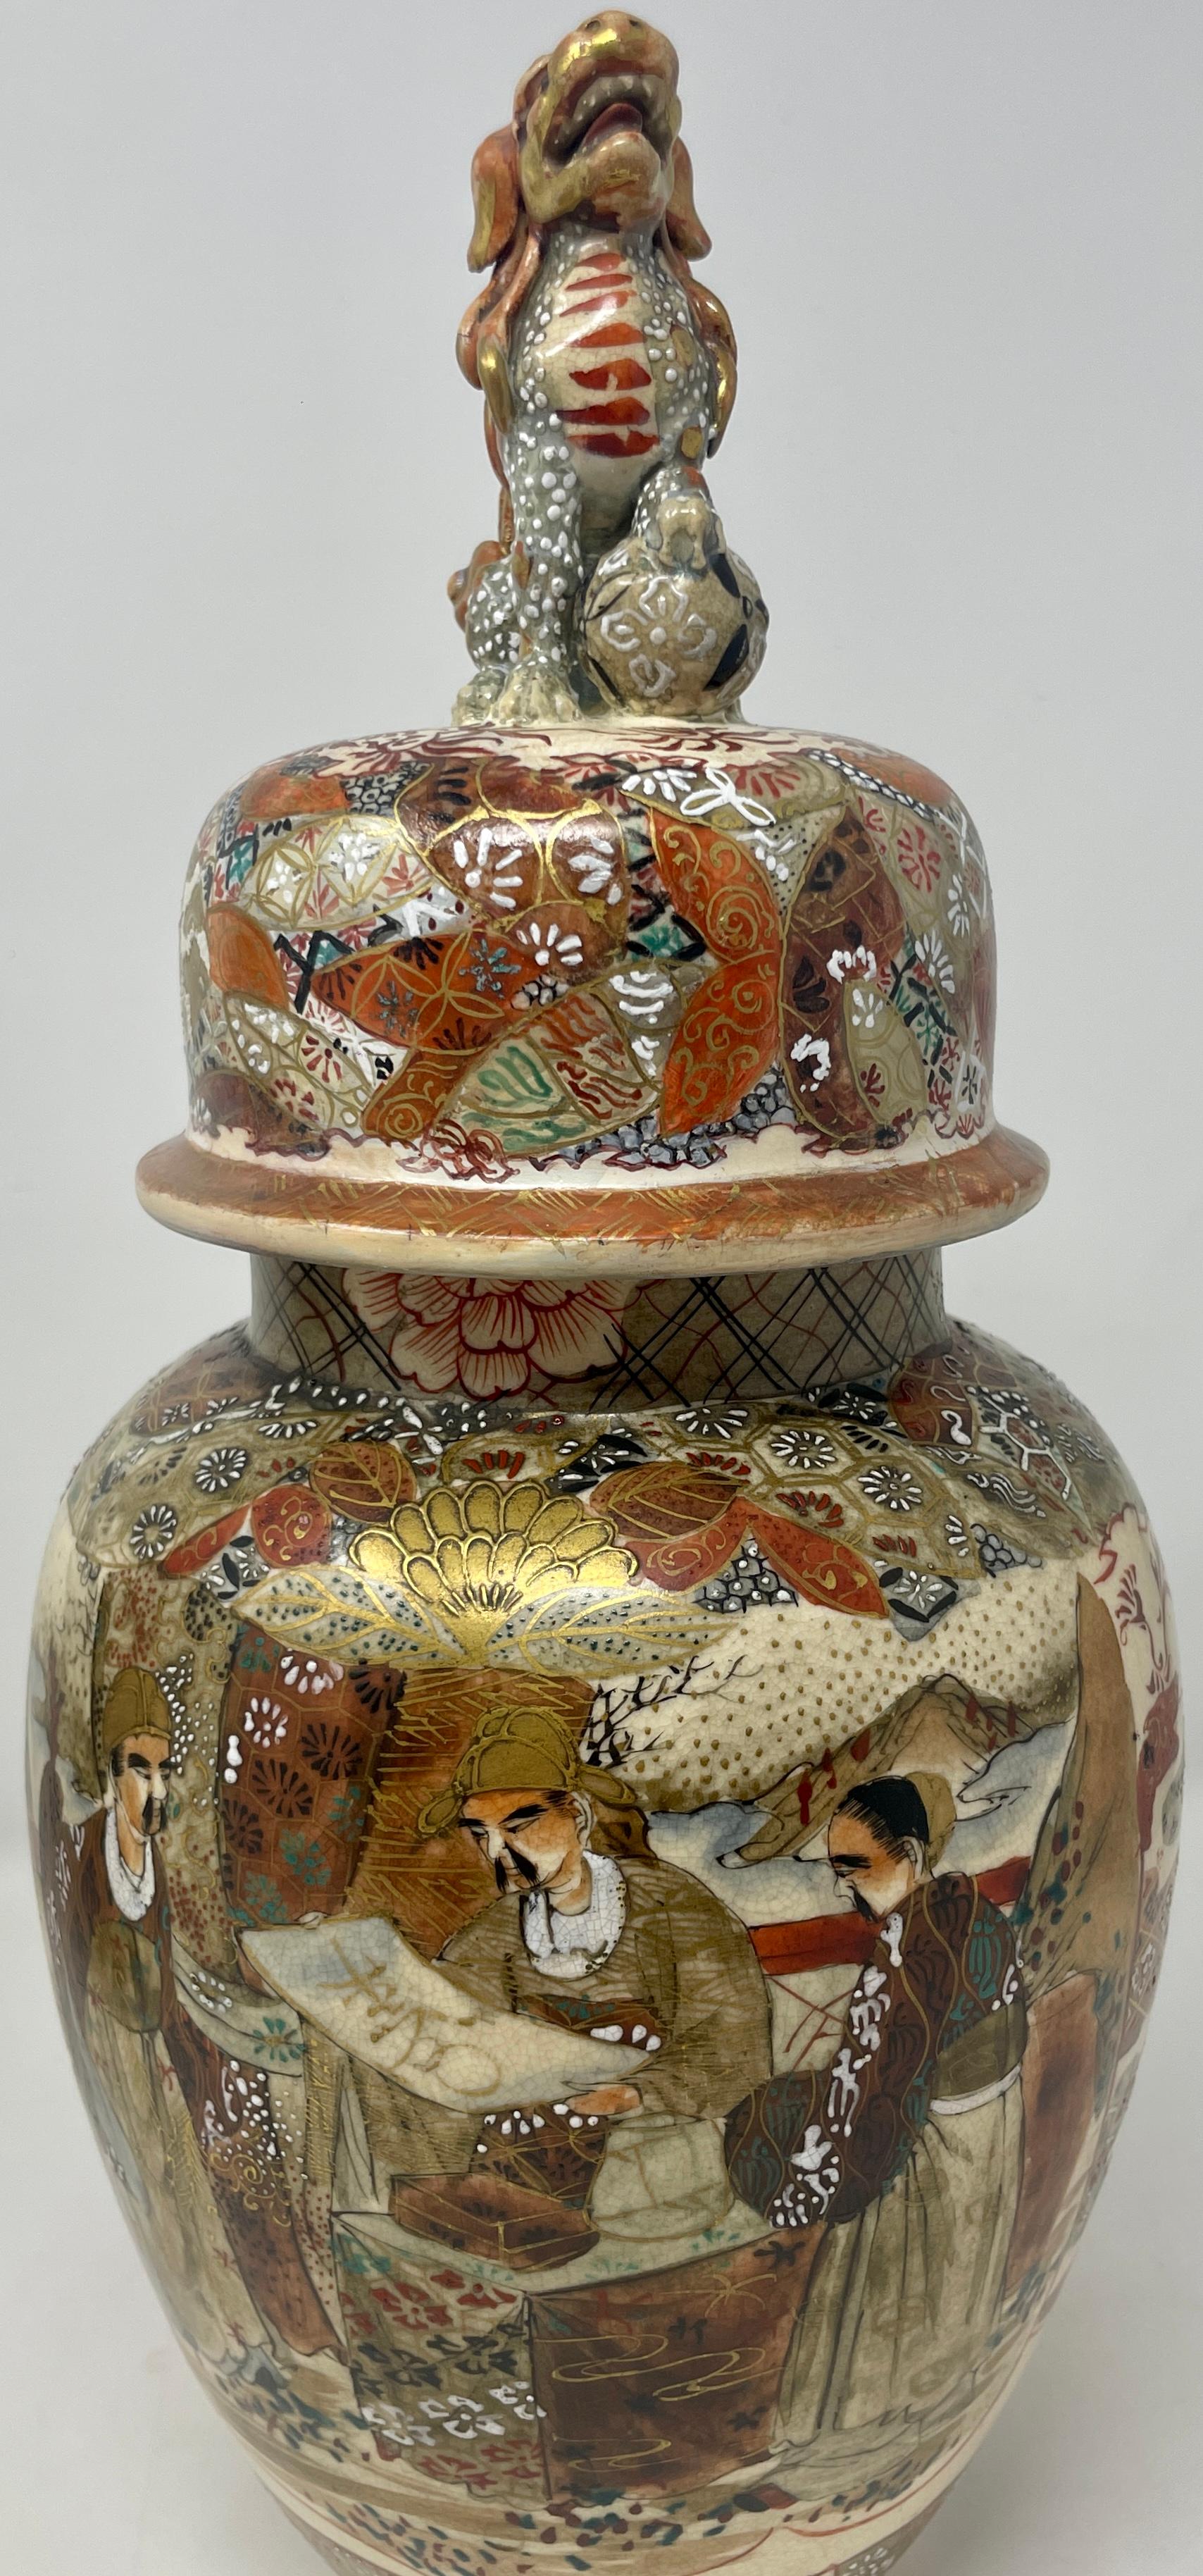 Pair Antique 19th Century Japanese Satsuma Porcelain Urns, Circa 1880 In Good Condition For Sale In New Orleans, LA